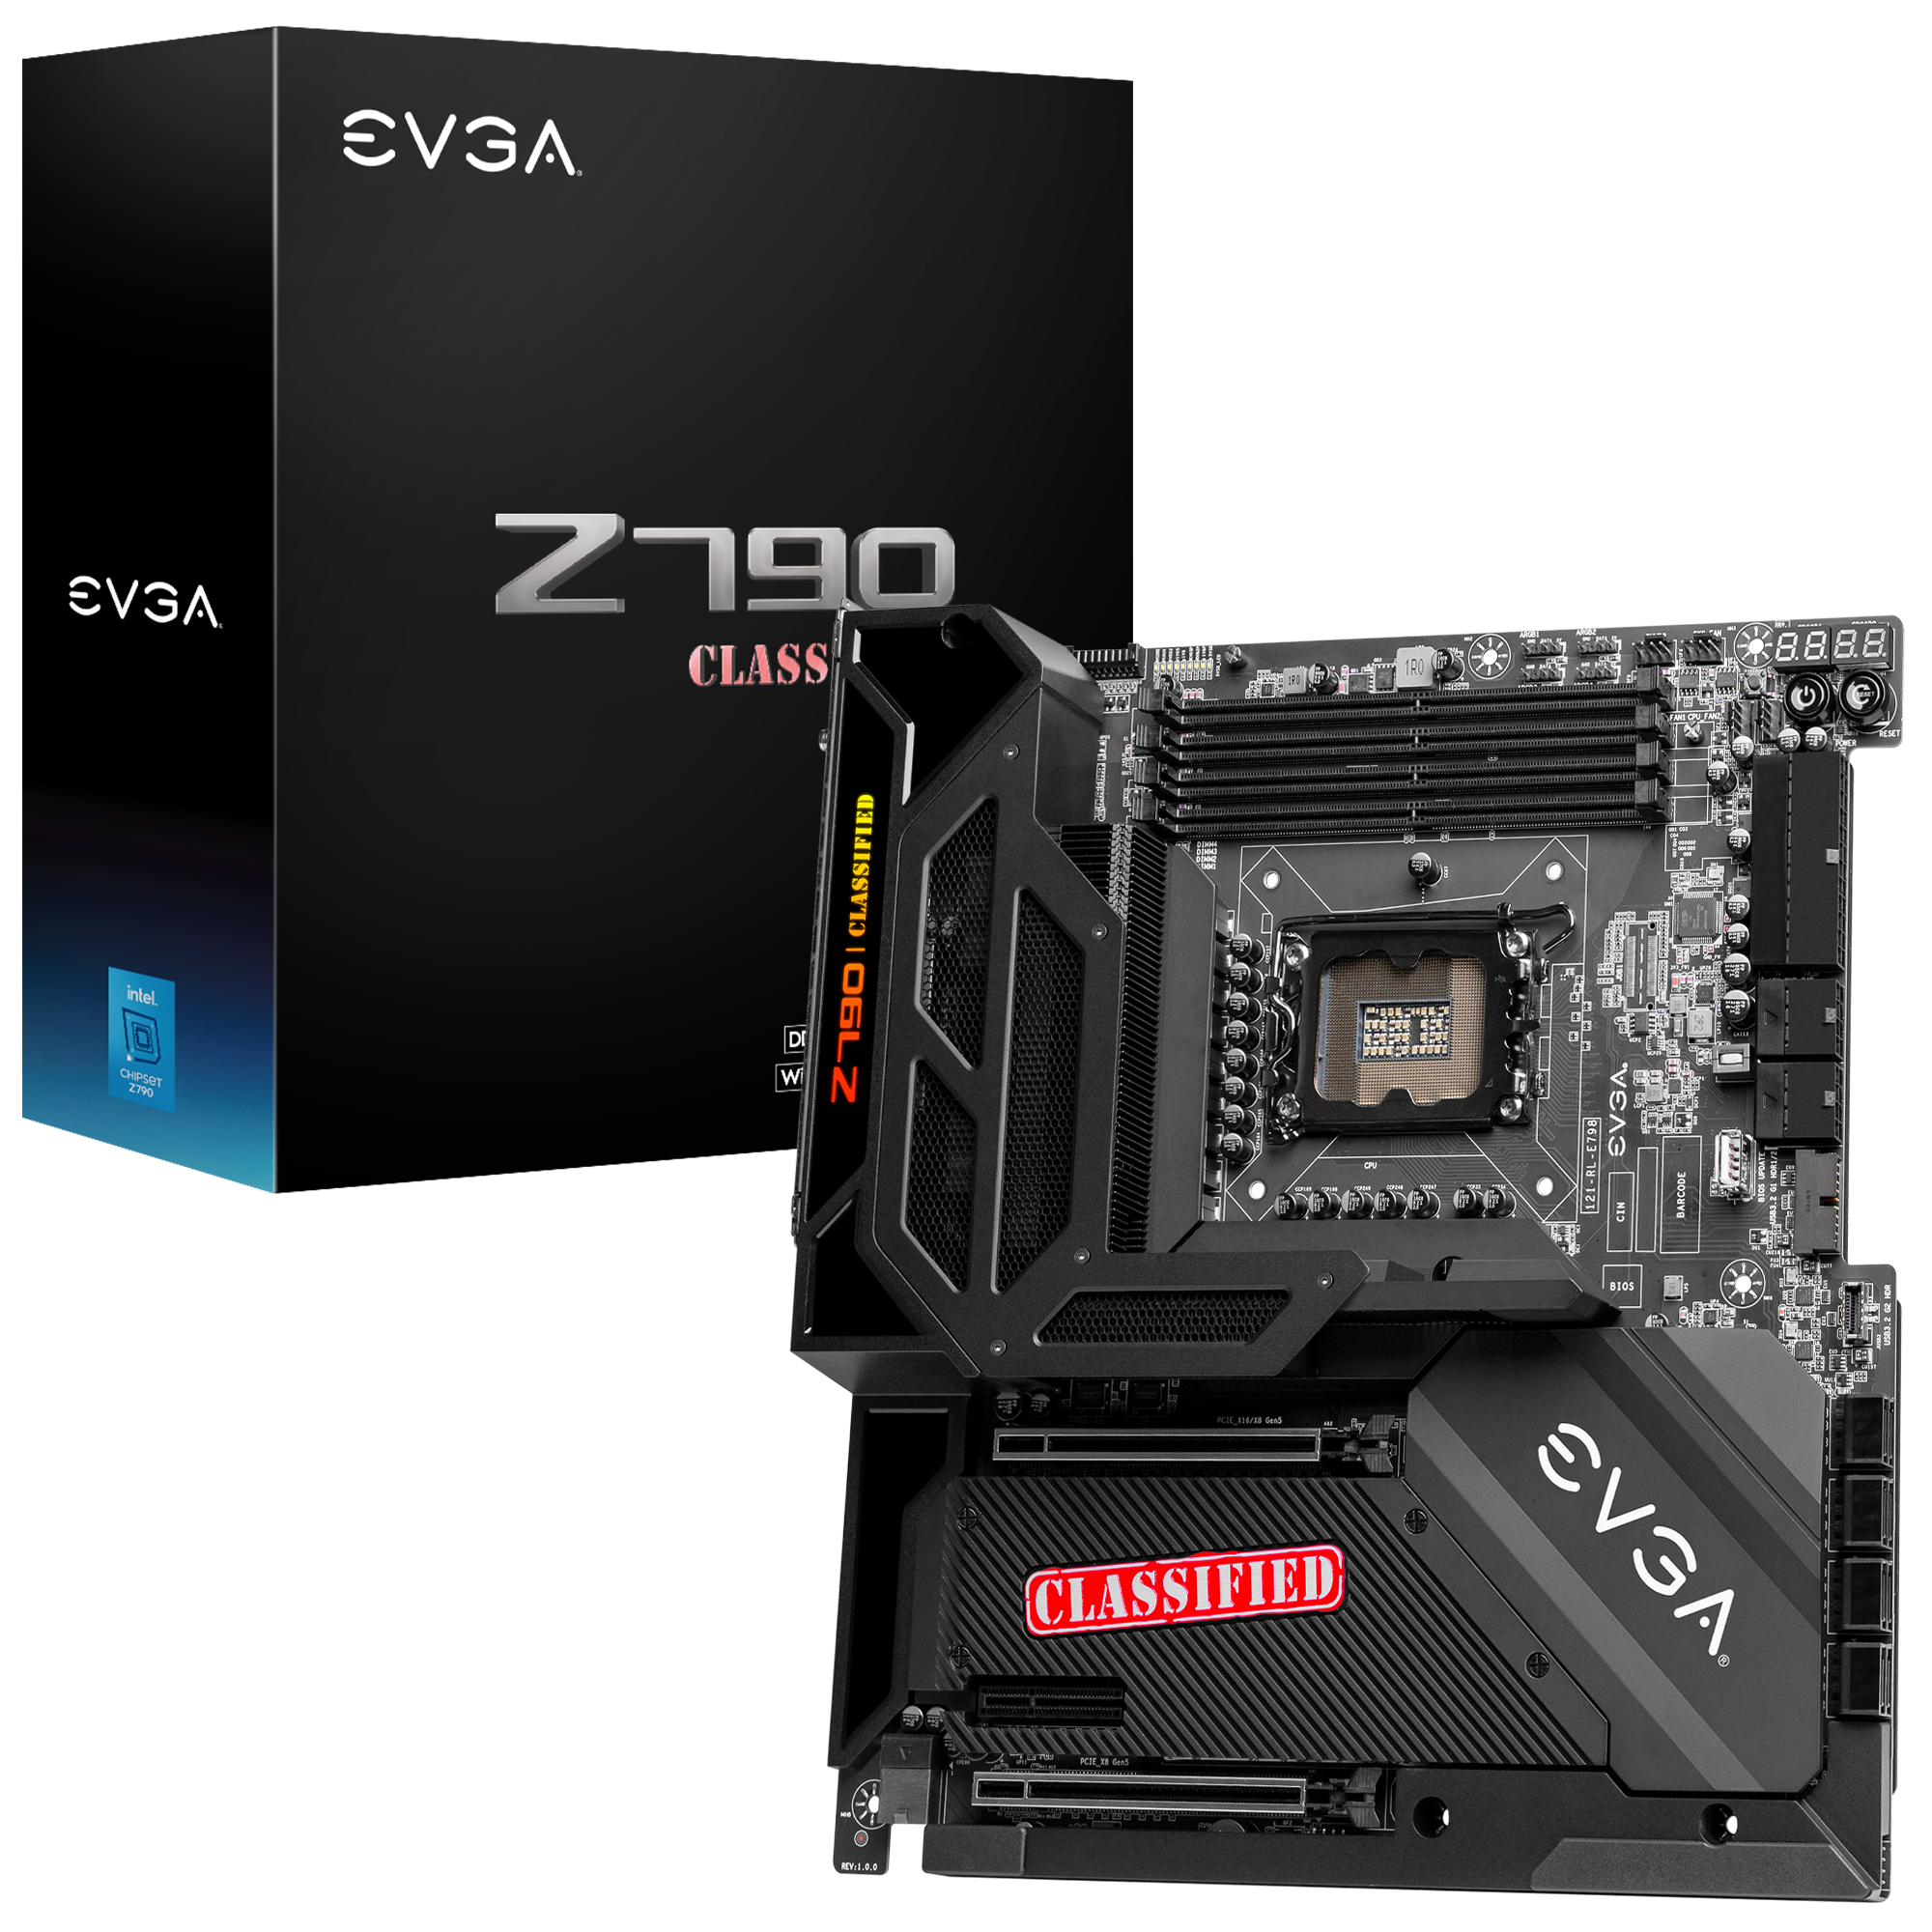 https://images.evga.com/products/gallery/png/121-RL-E798-KR_XL_1.png